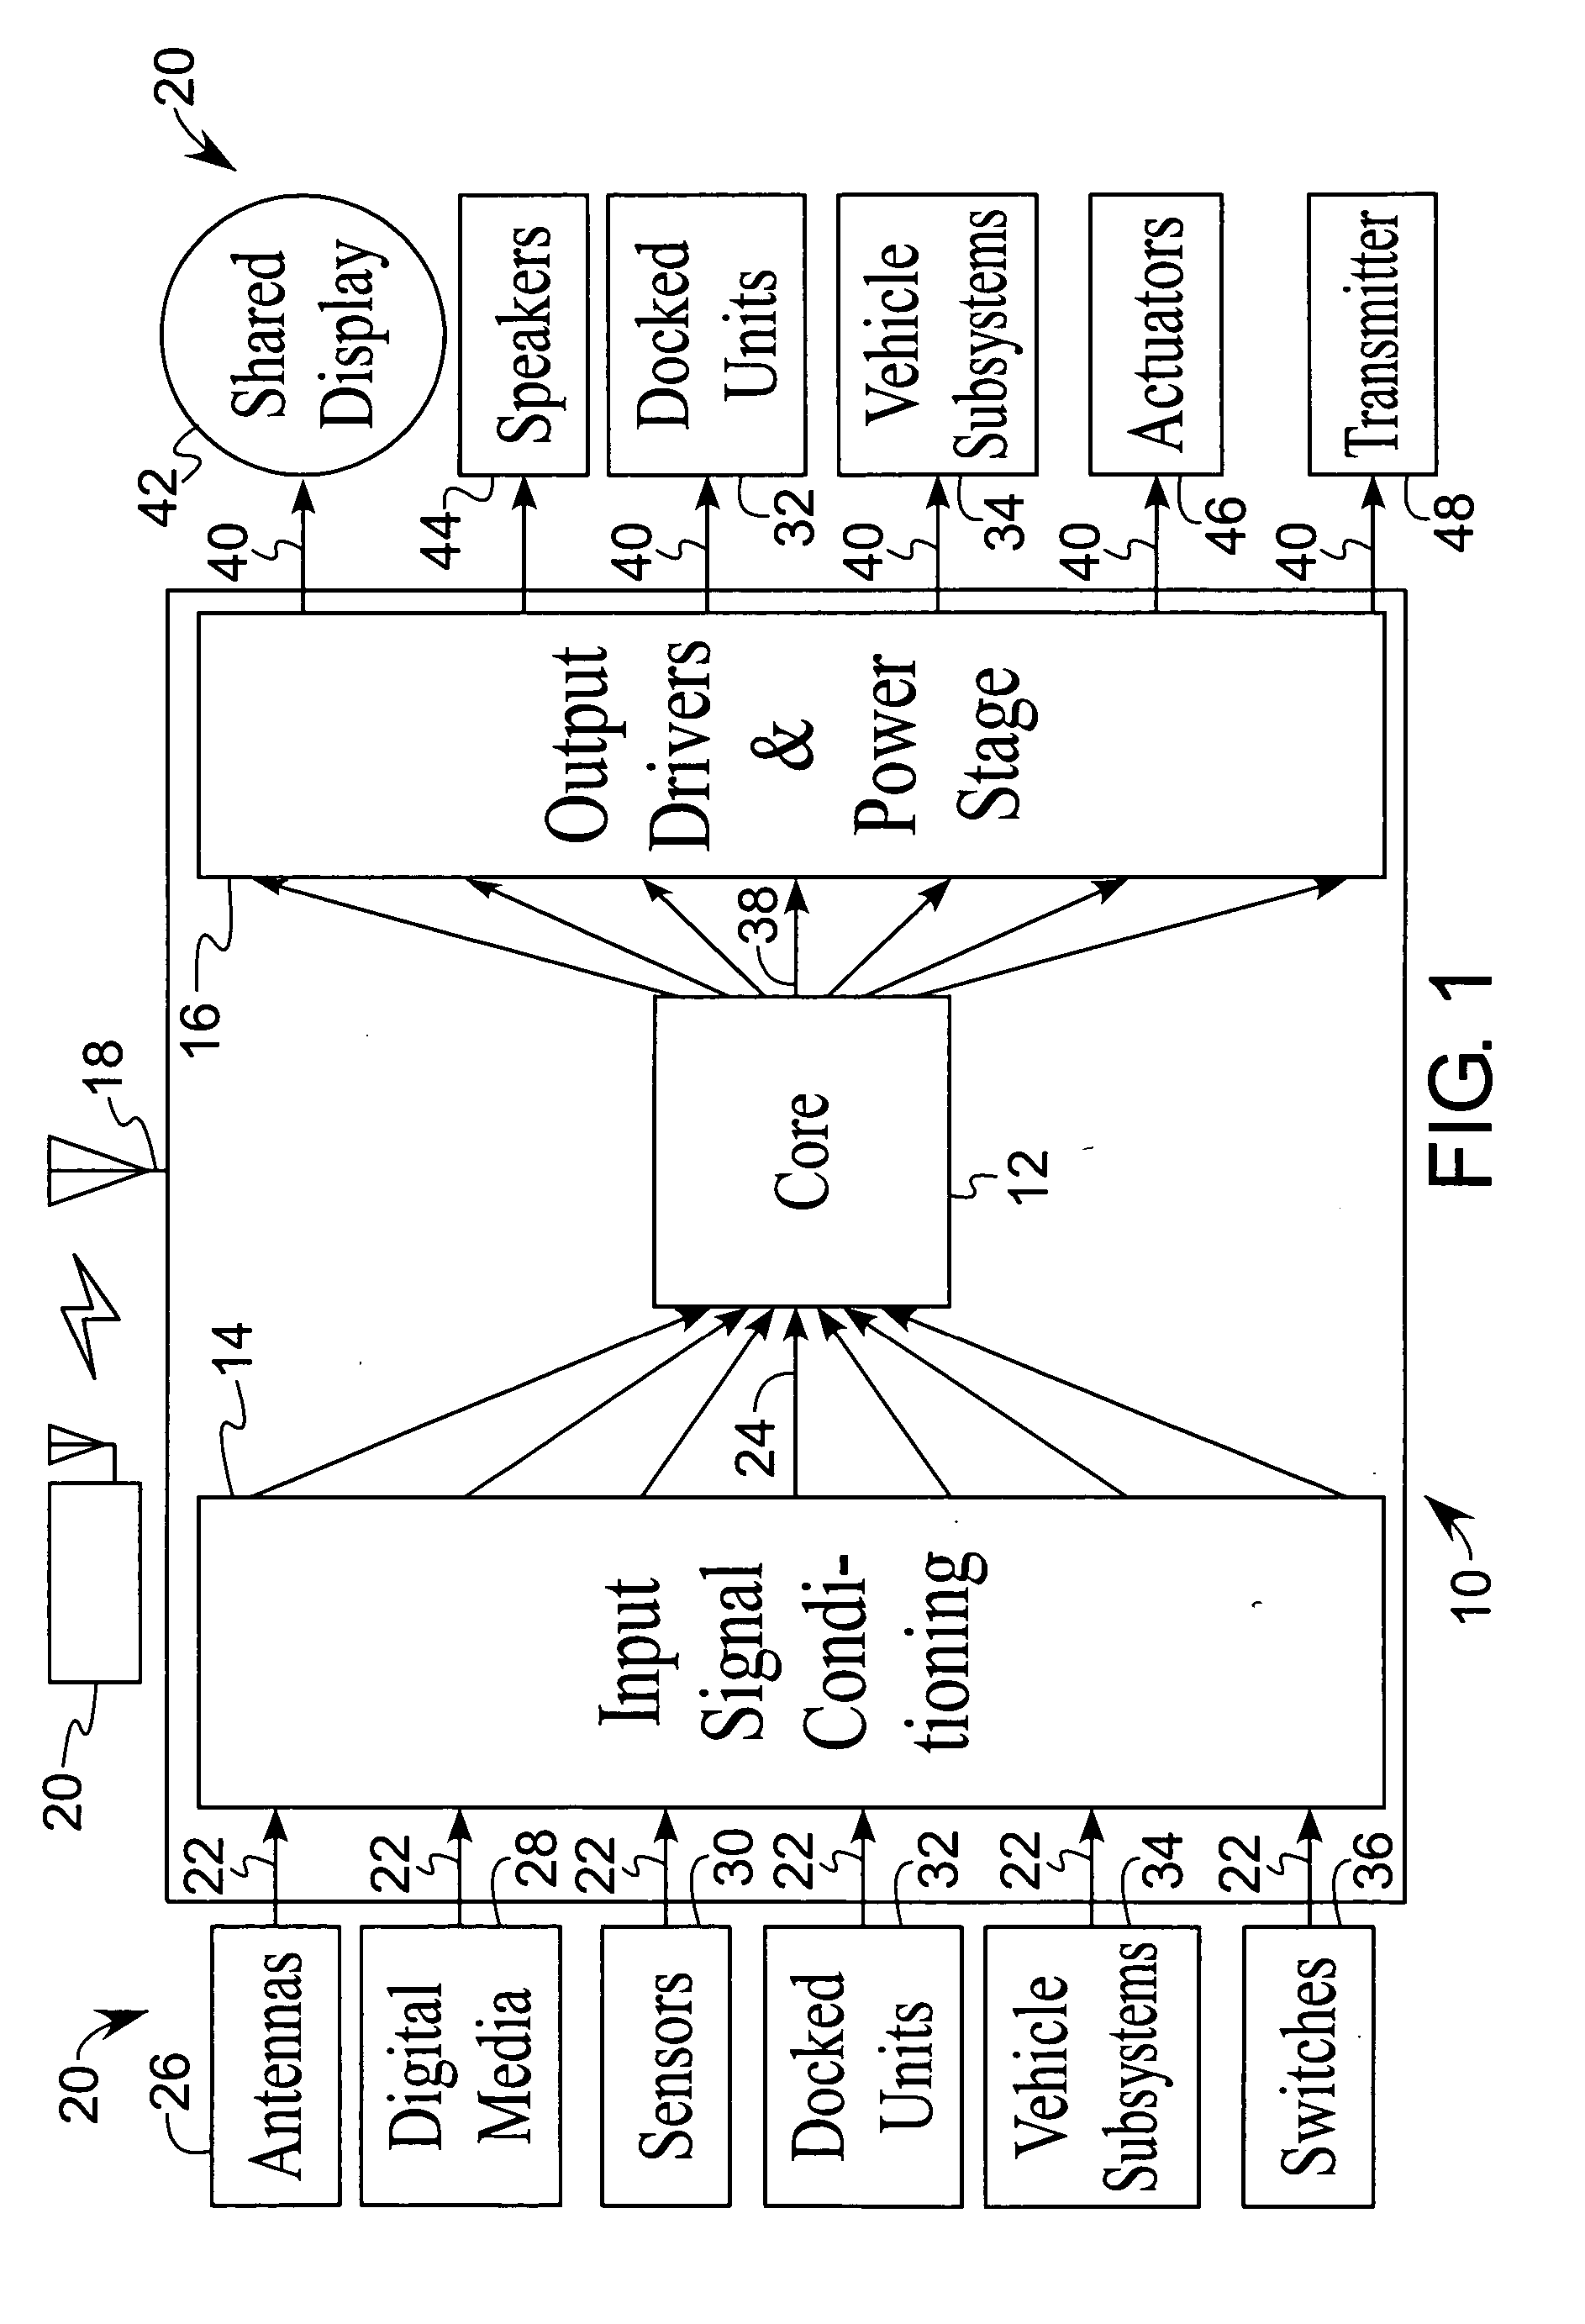 Systems and methods for implementing a vehicle control and interconnection system